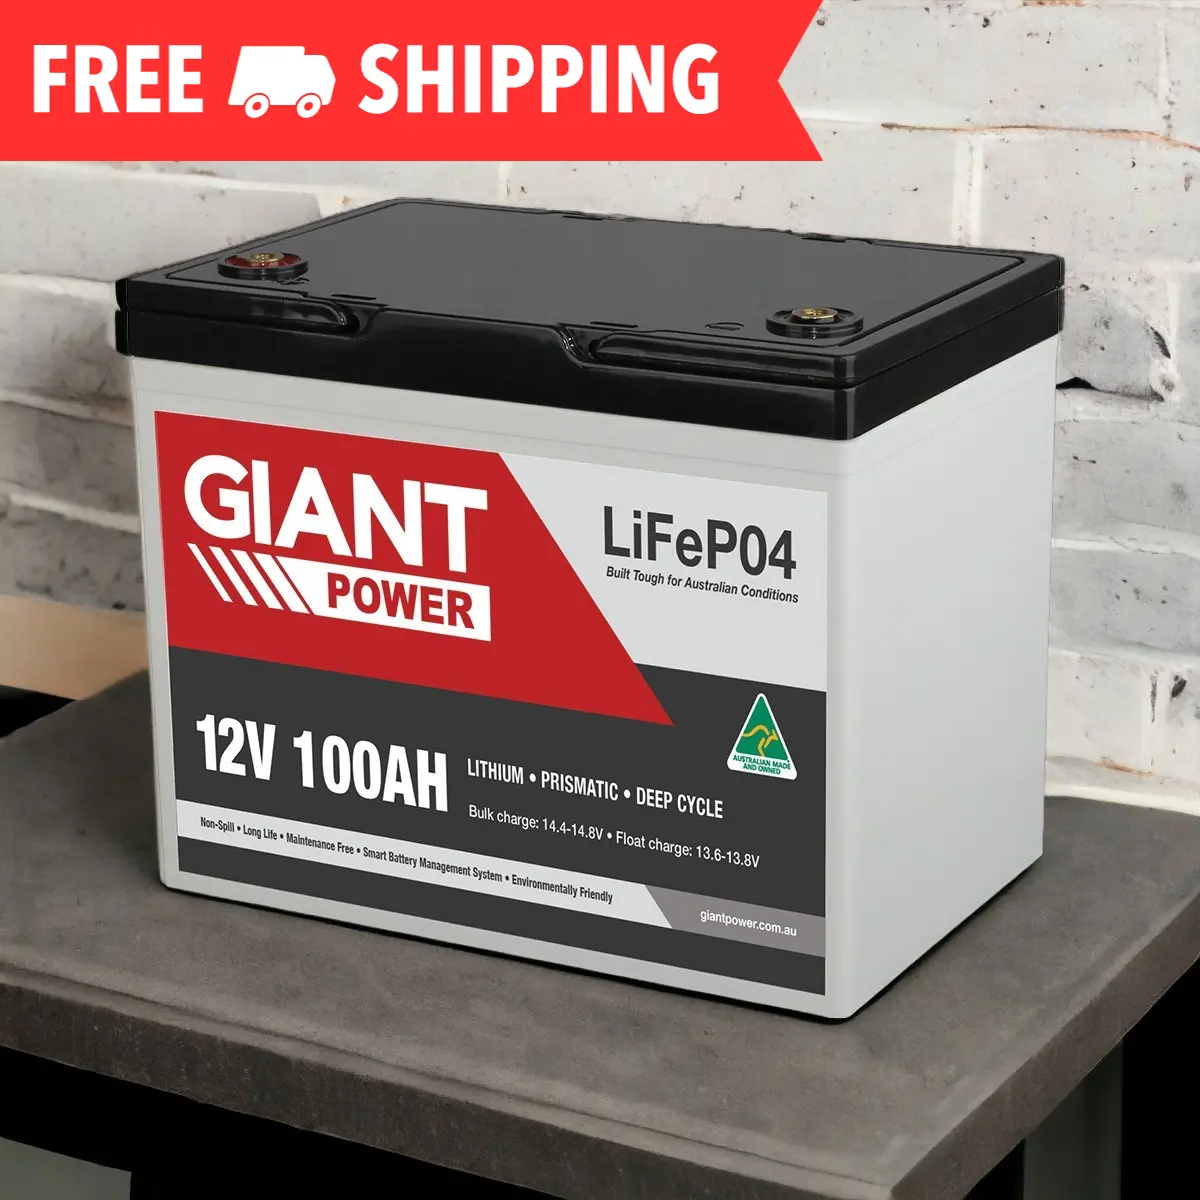 aussie batteries solar panel review - What are the best Australian made lithium batteries